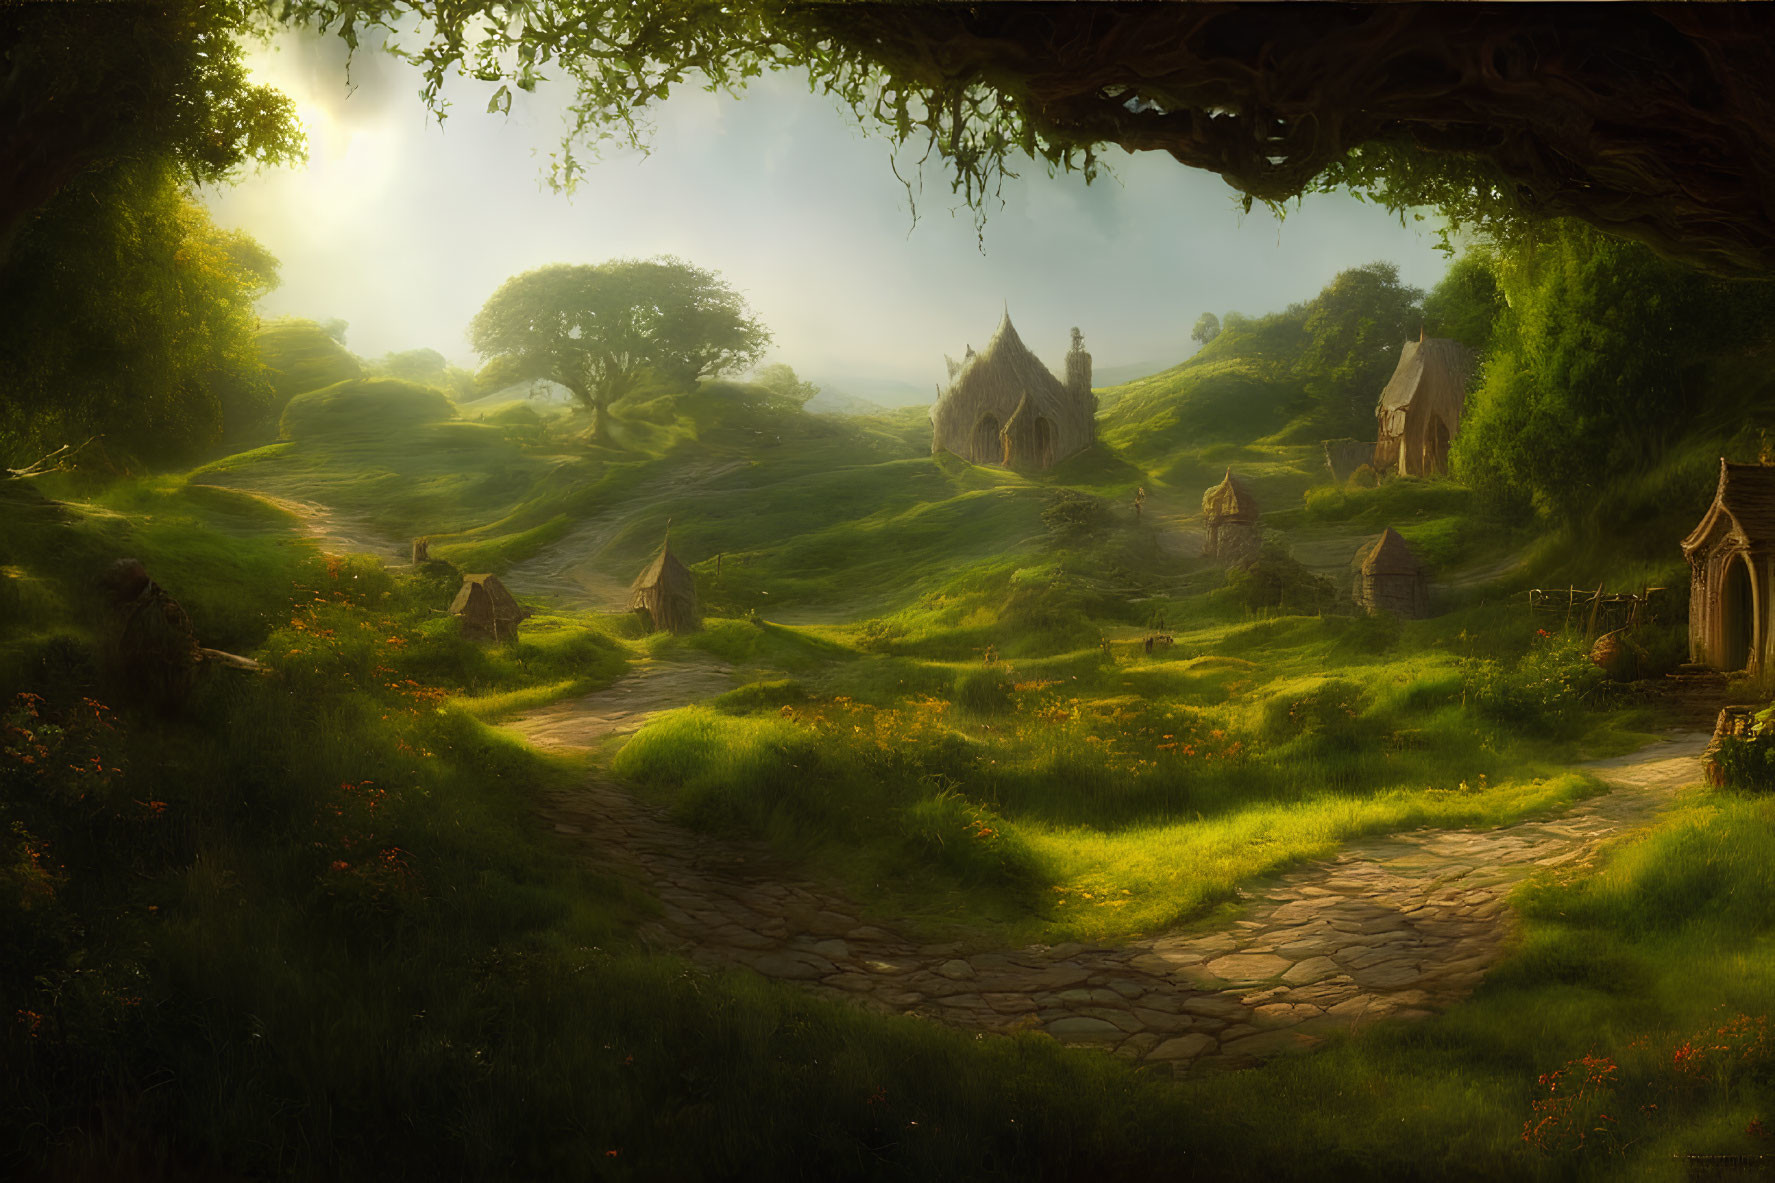 Tranquil fantasy landscape with lush greenery and quaint structures